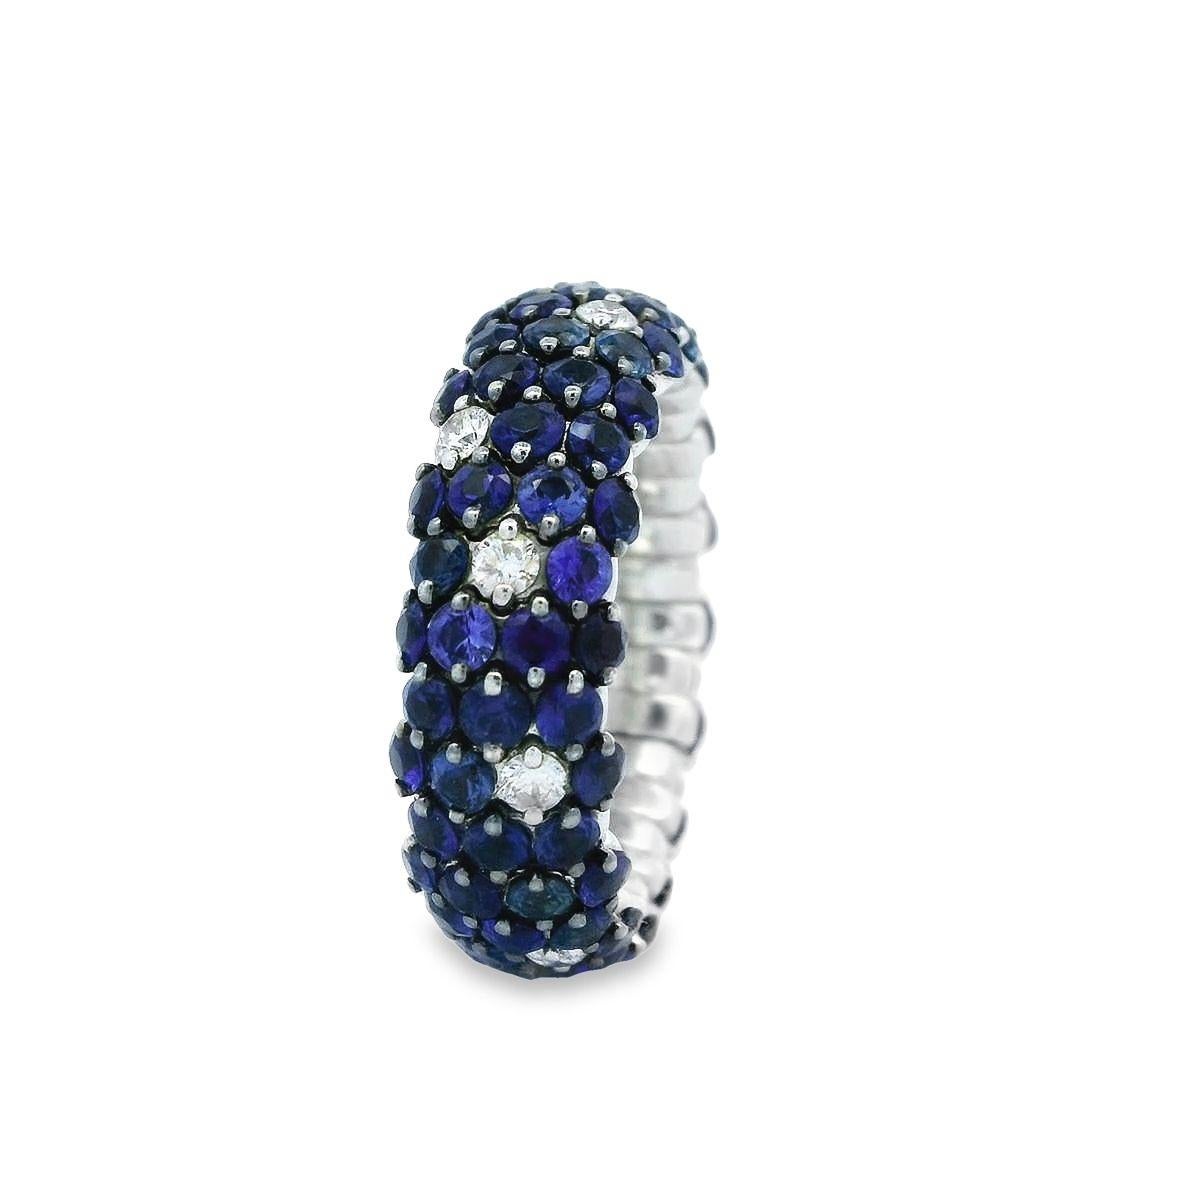 Offered by Alex & Co is a striking 18K white gold stretch ring features 4.92ct of round blue sapphires and brilliant cut round diamonds weighing 0.36ct F color, VS clarity classic look. The expanding stretching action makes this ring easy and